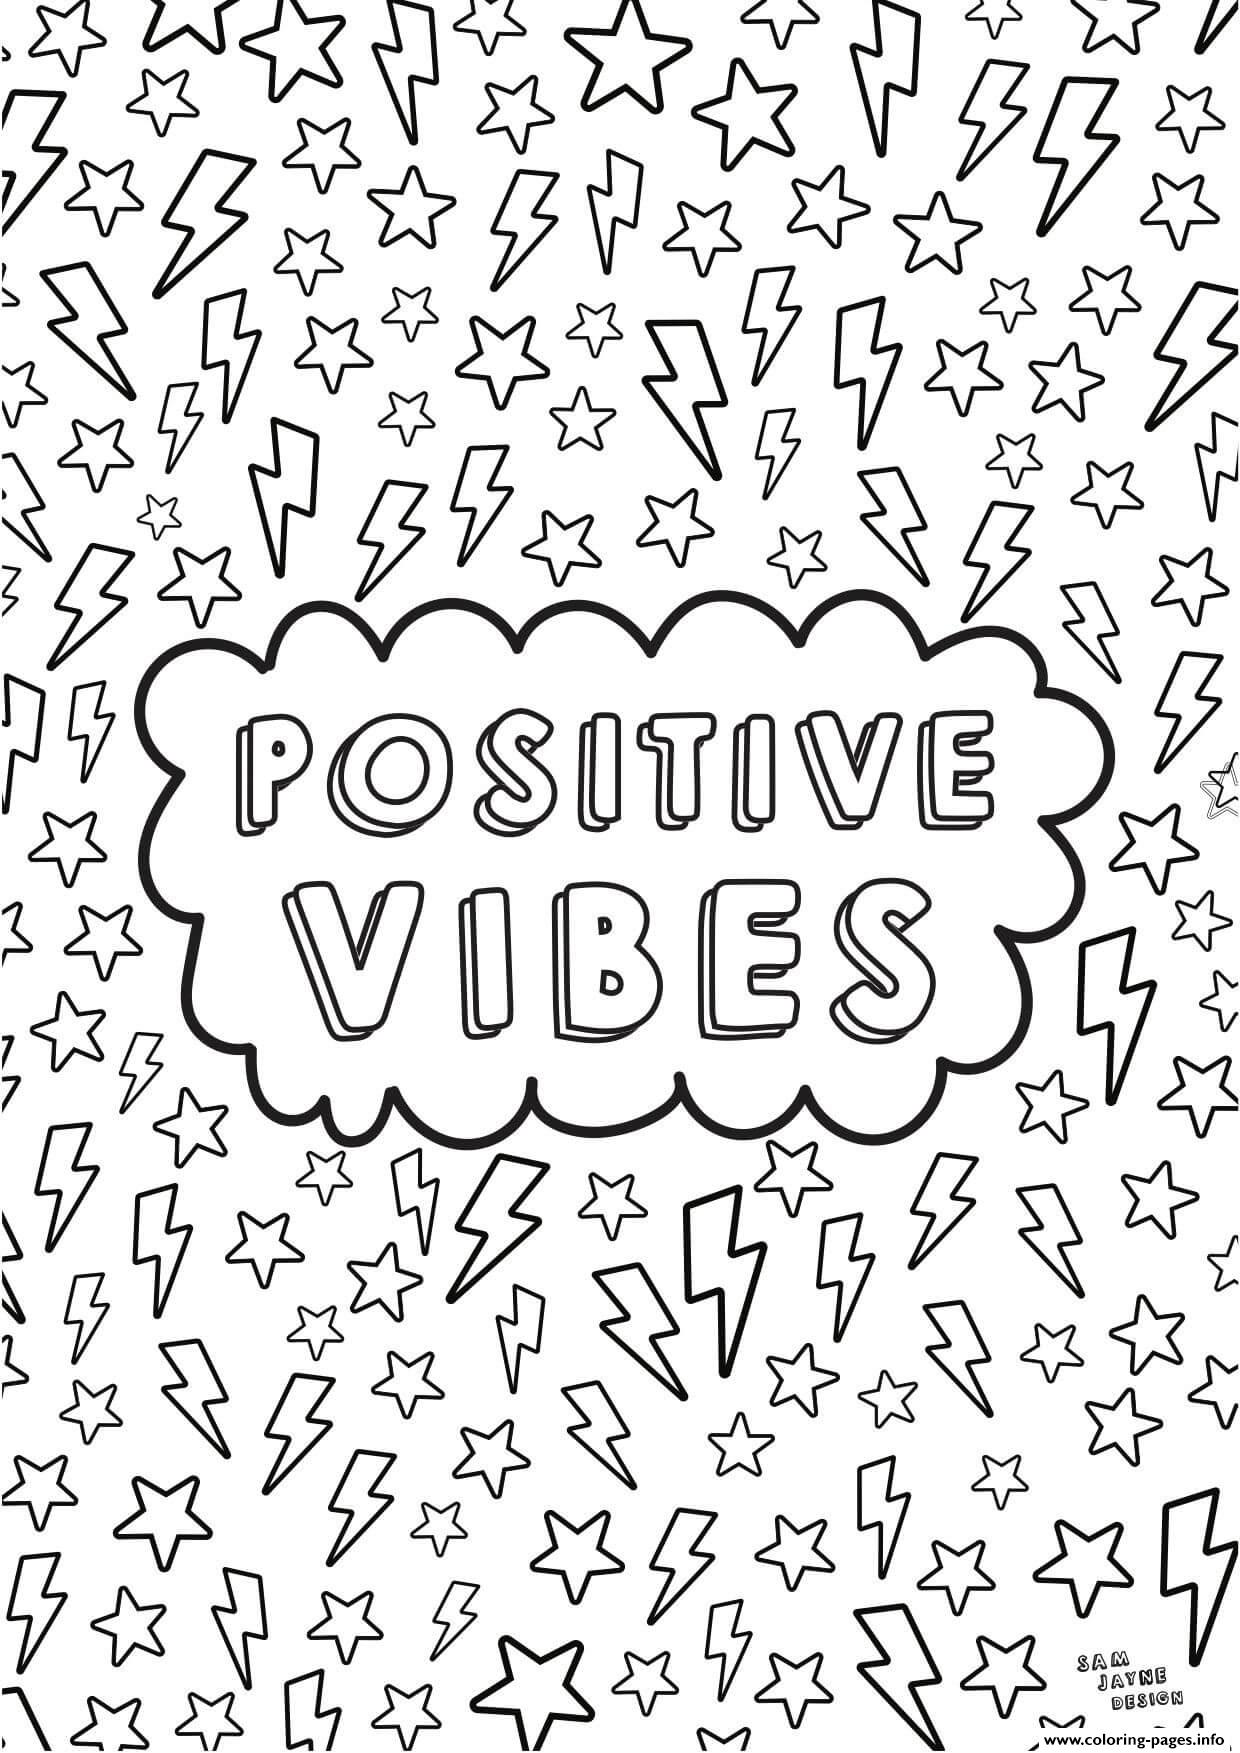 Positive Vibes Aesthetics Coloring page Printable